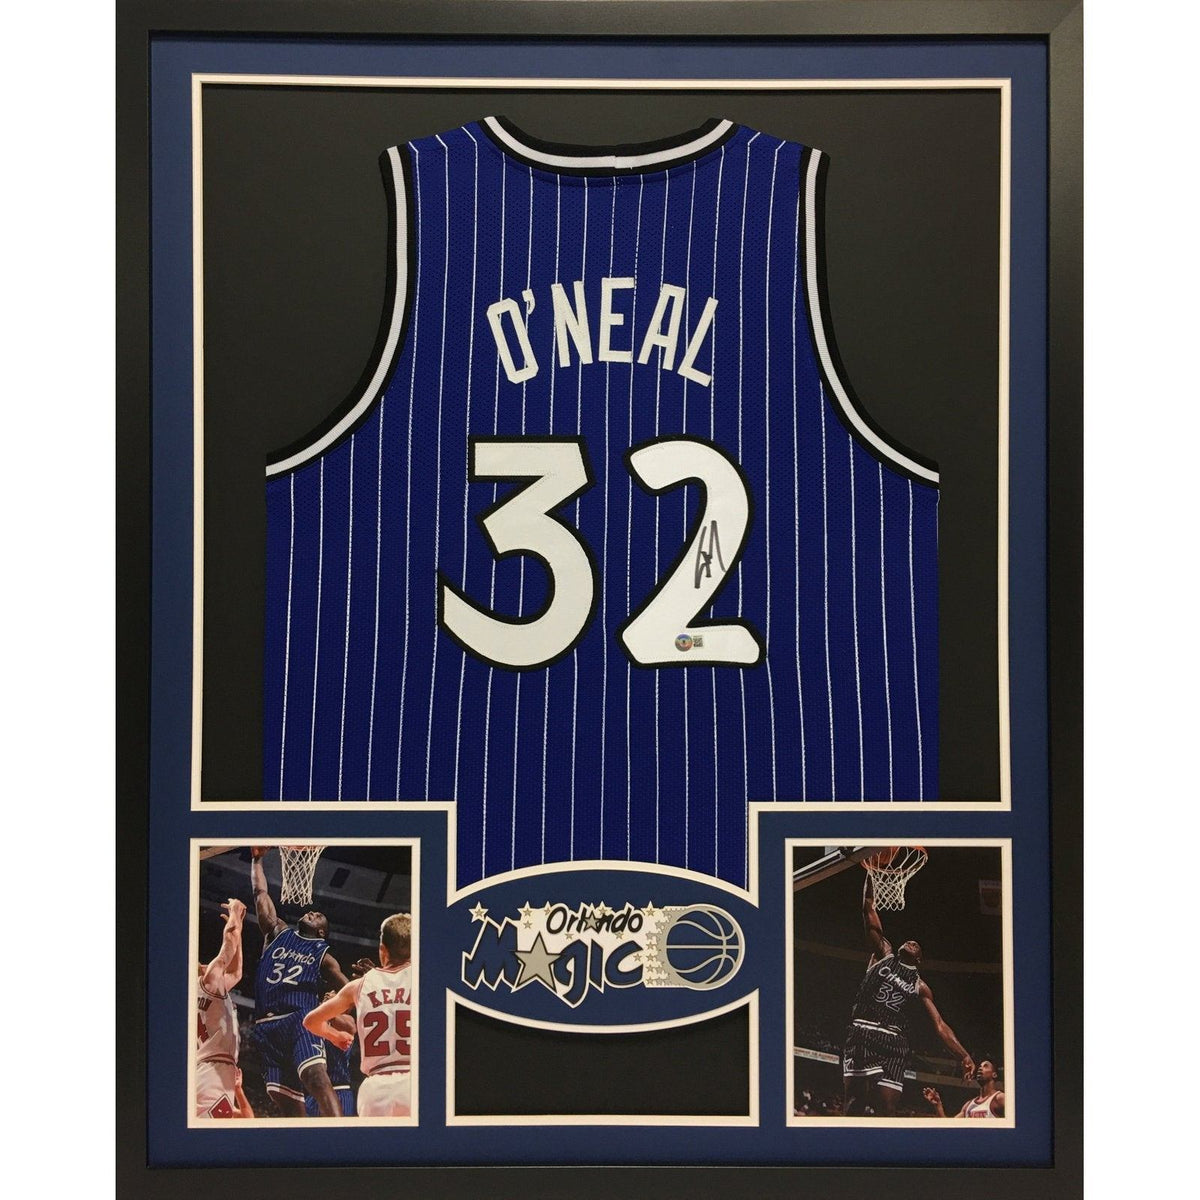 Shaq Framed Signed Jersey Orlando Magic Beckett Autographed Shaquille O'Neal